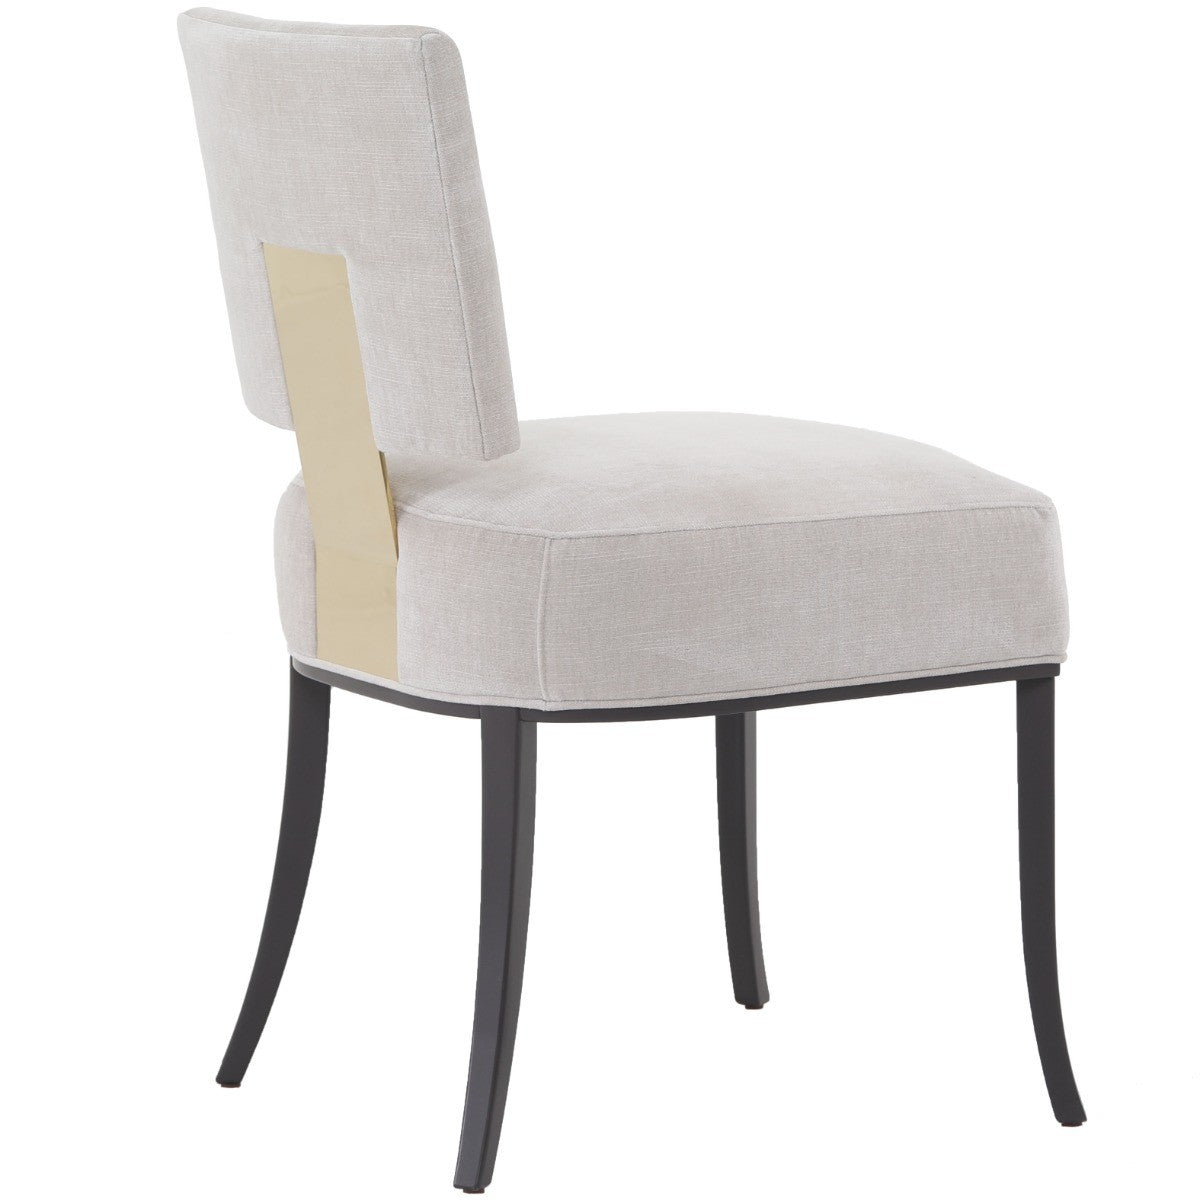  Caracole-Caracole Classic Reserved Seating Dining Chair-Natural 757 